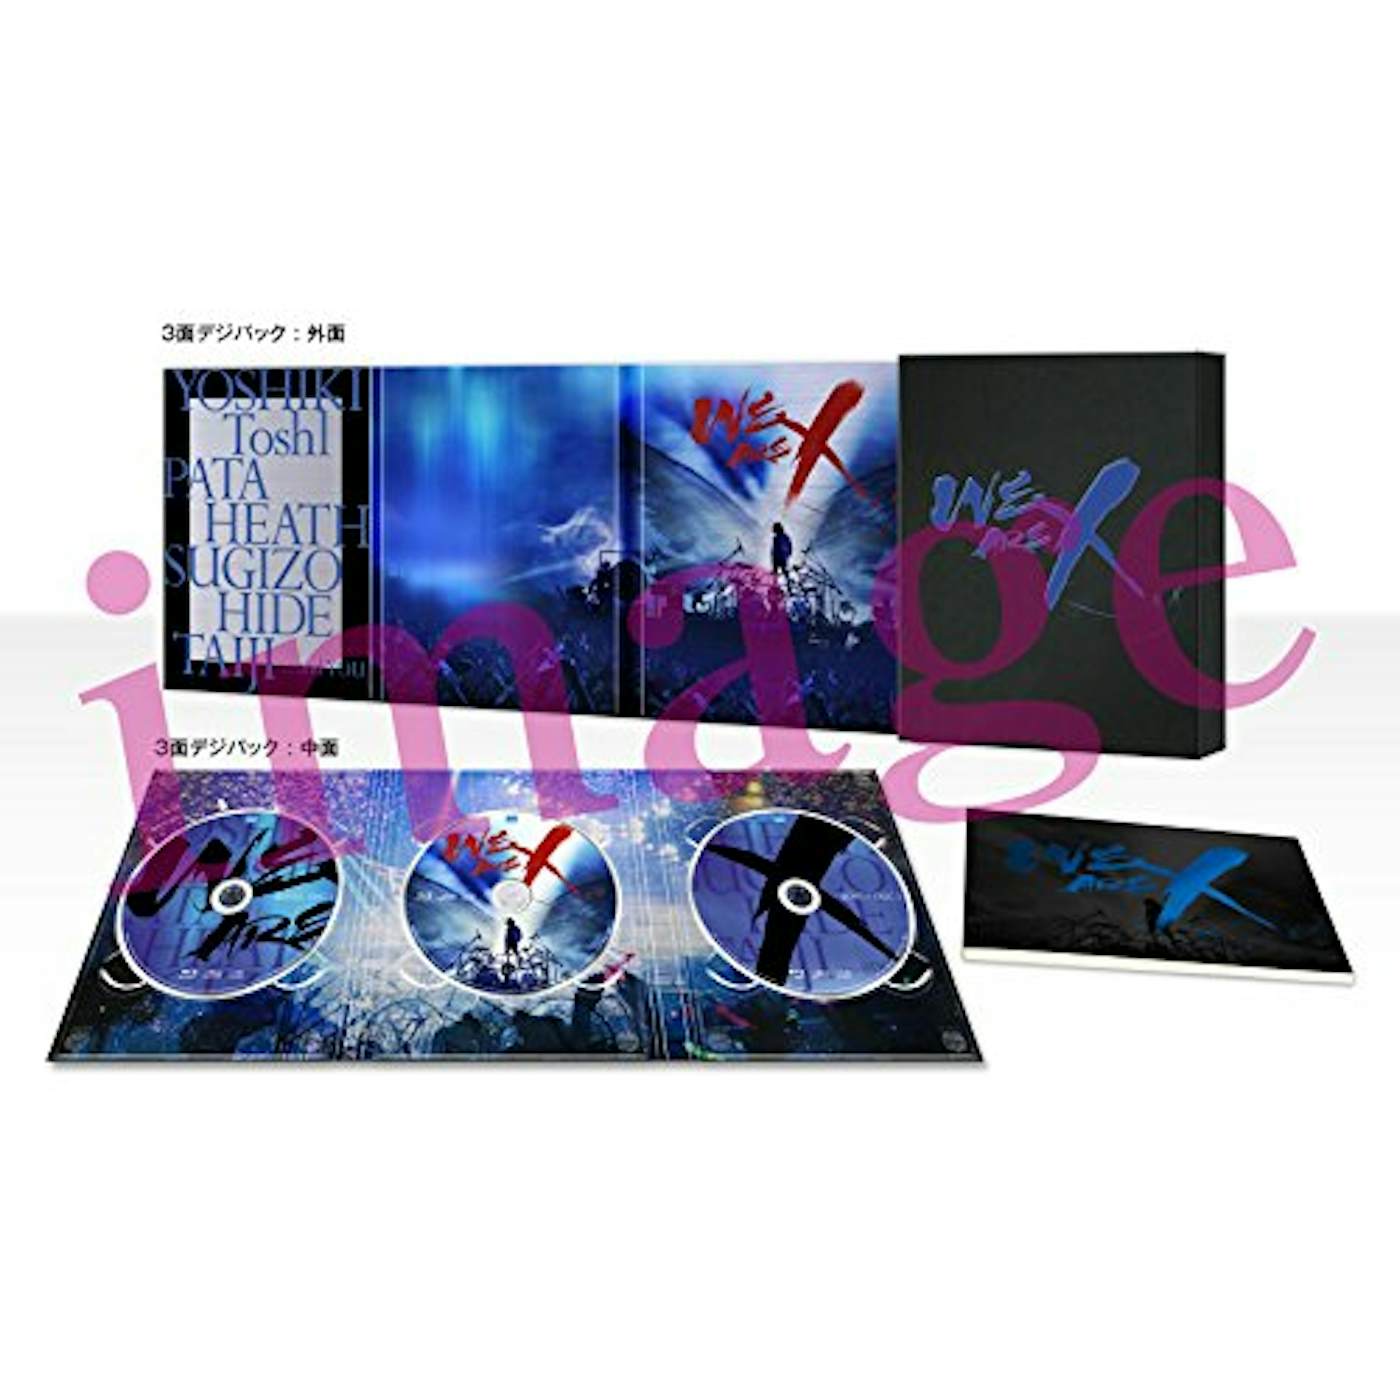 X JAPAN WE ARE X: SPECIAL EDITION Blu-ray